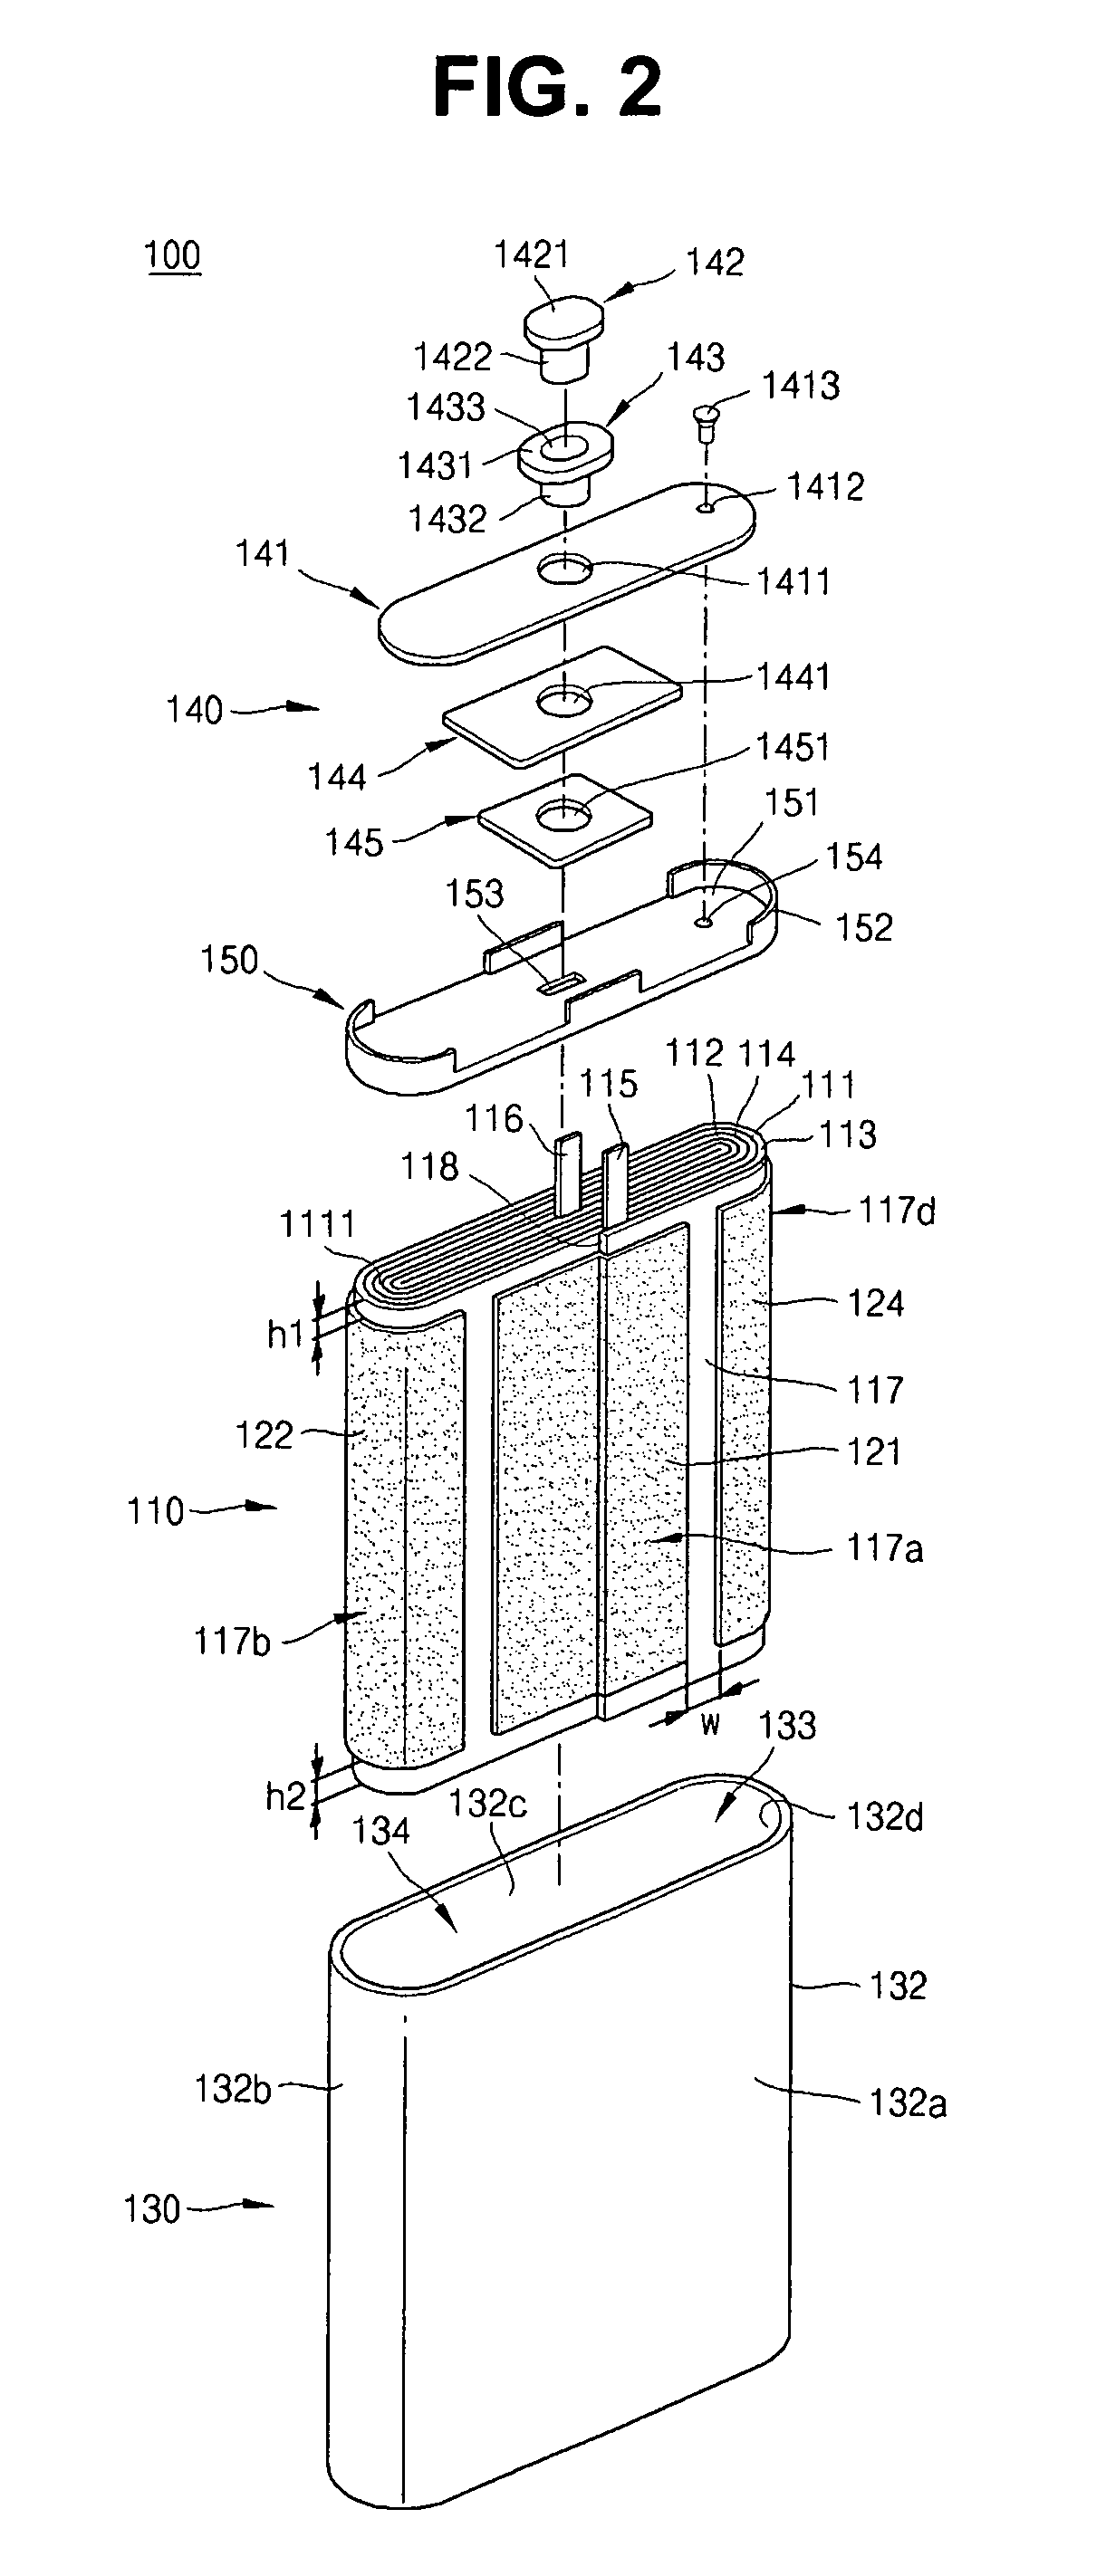 Secondary battery with finishing tapes